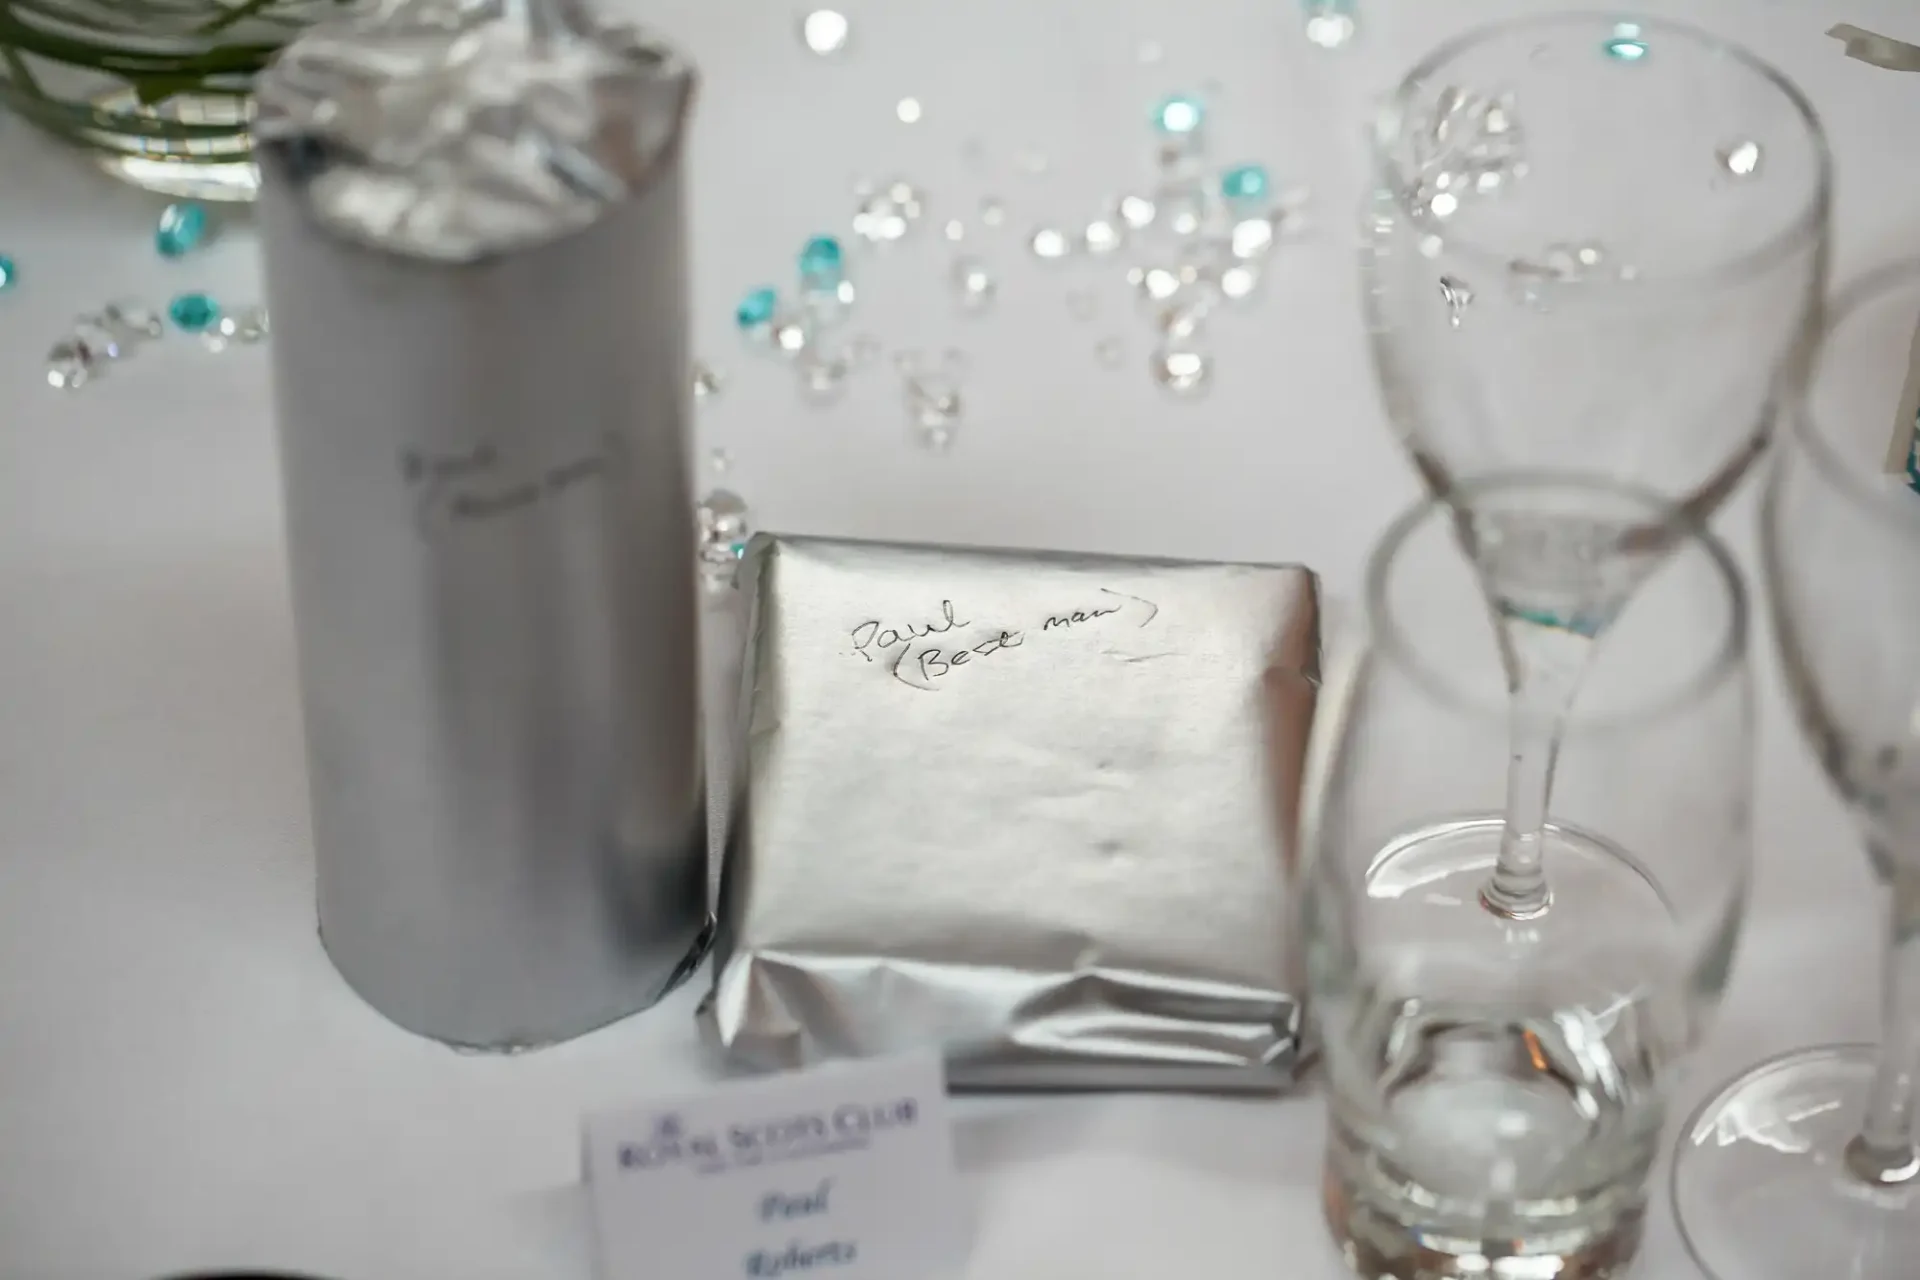 Table setting with a foil-wrapped gift labeled "paul's present" beside scattered decorative crystals and glassware.